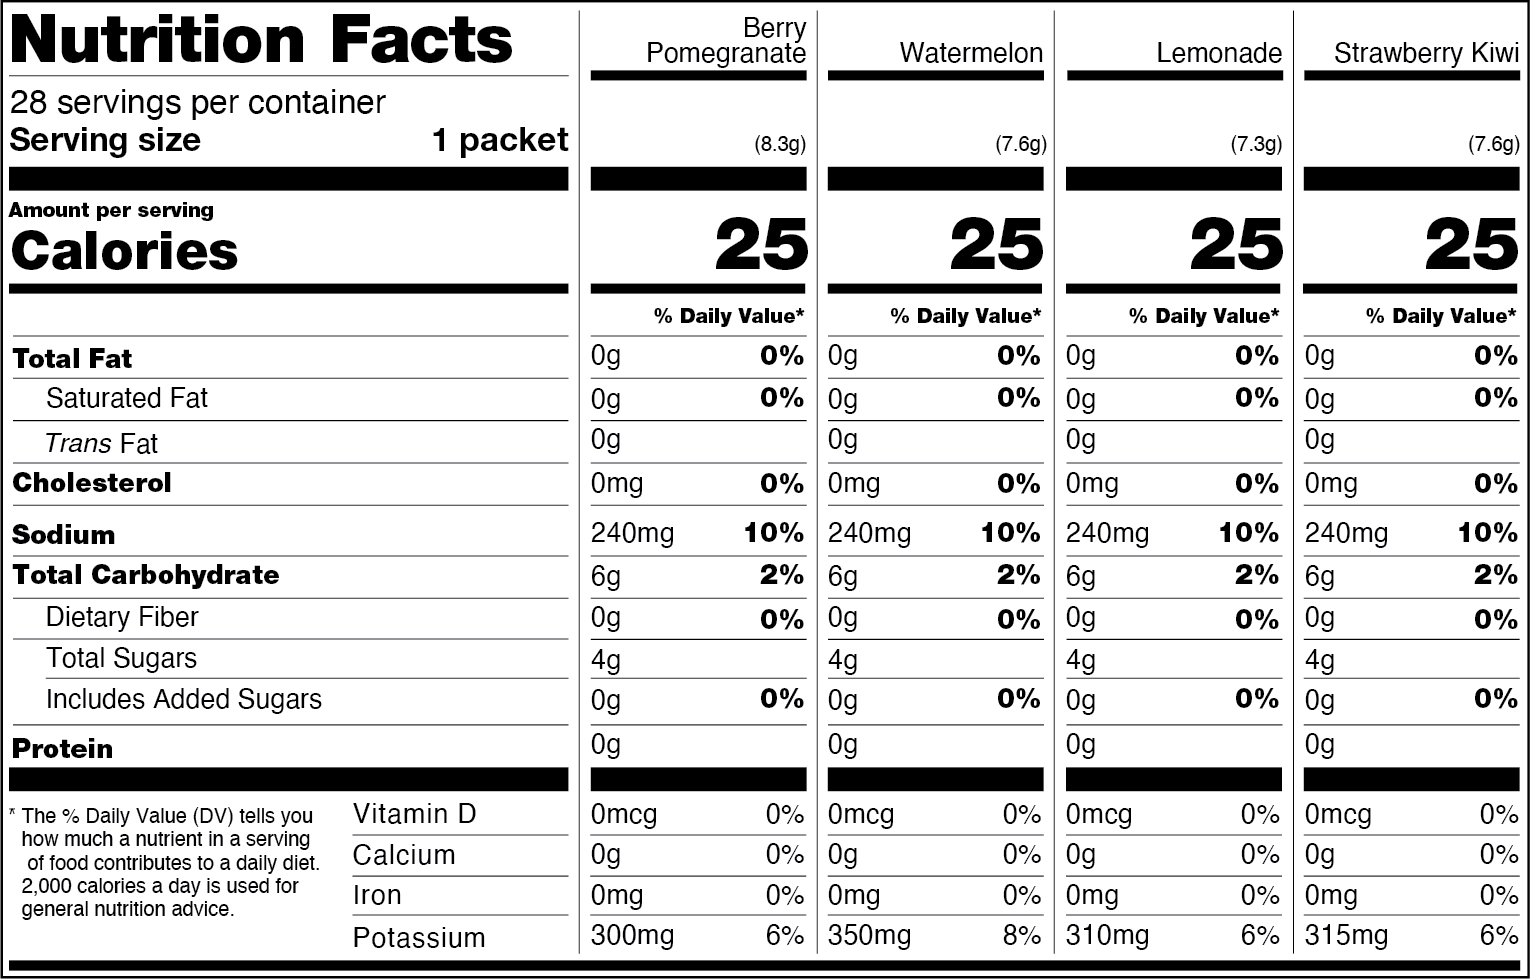 Nutrition facts for a variety pack of electrolyte mixes.